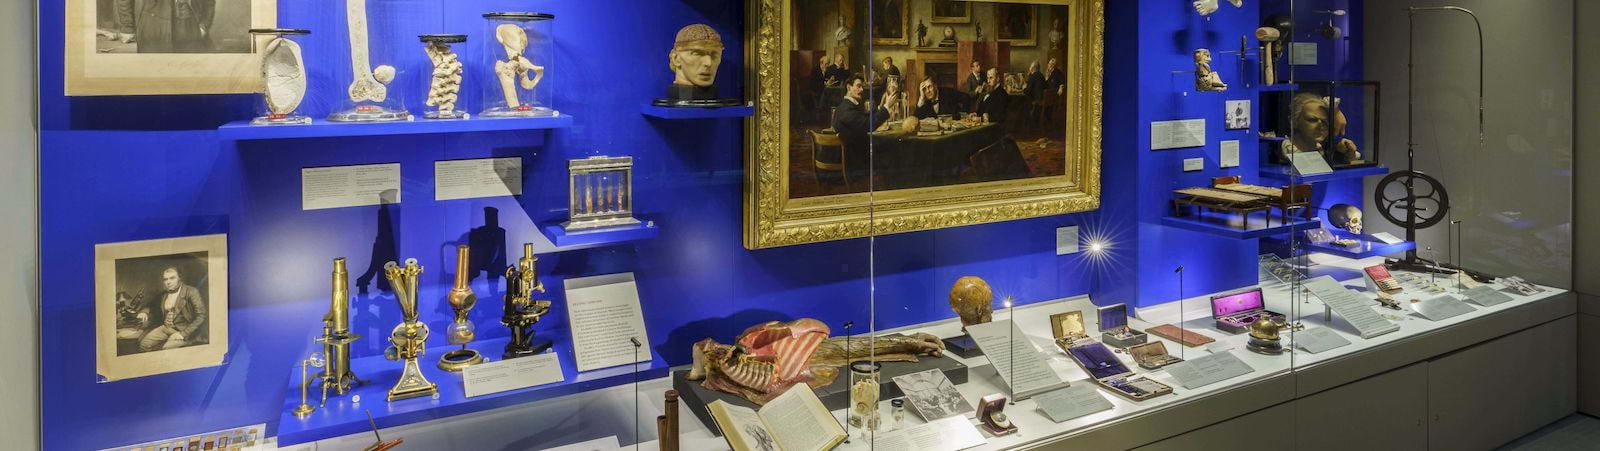 The Hunterian Museum is reopening after a six year absence